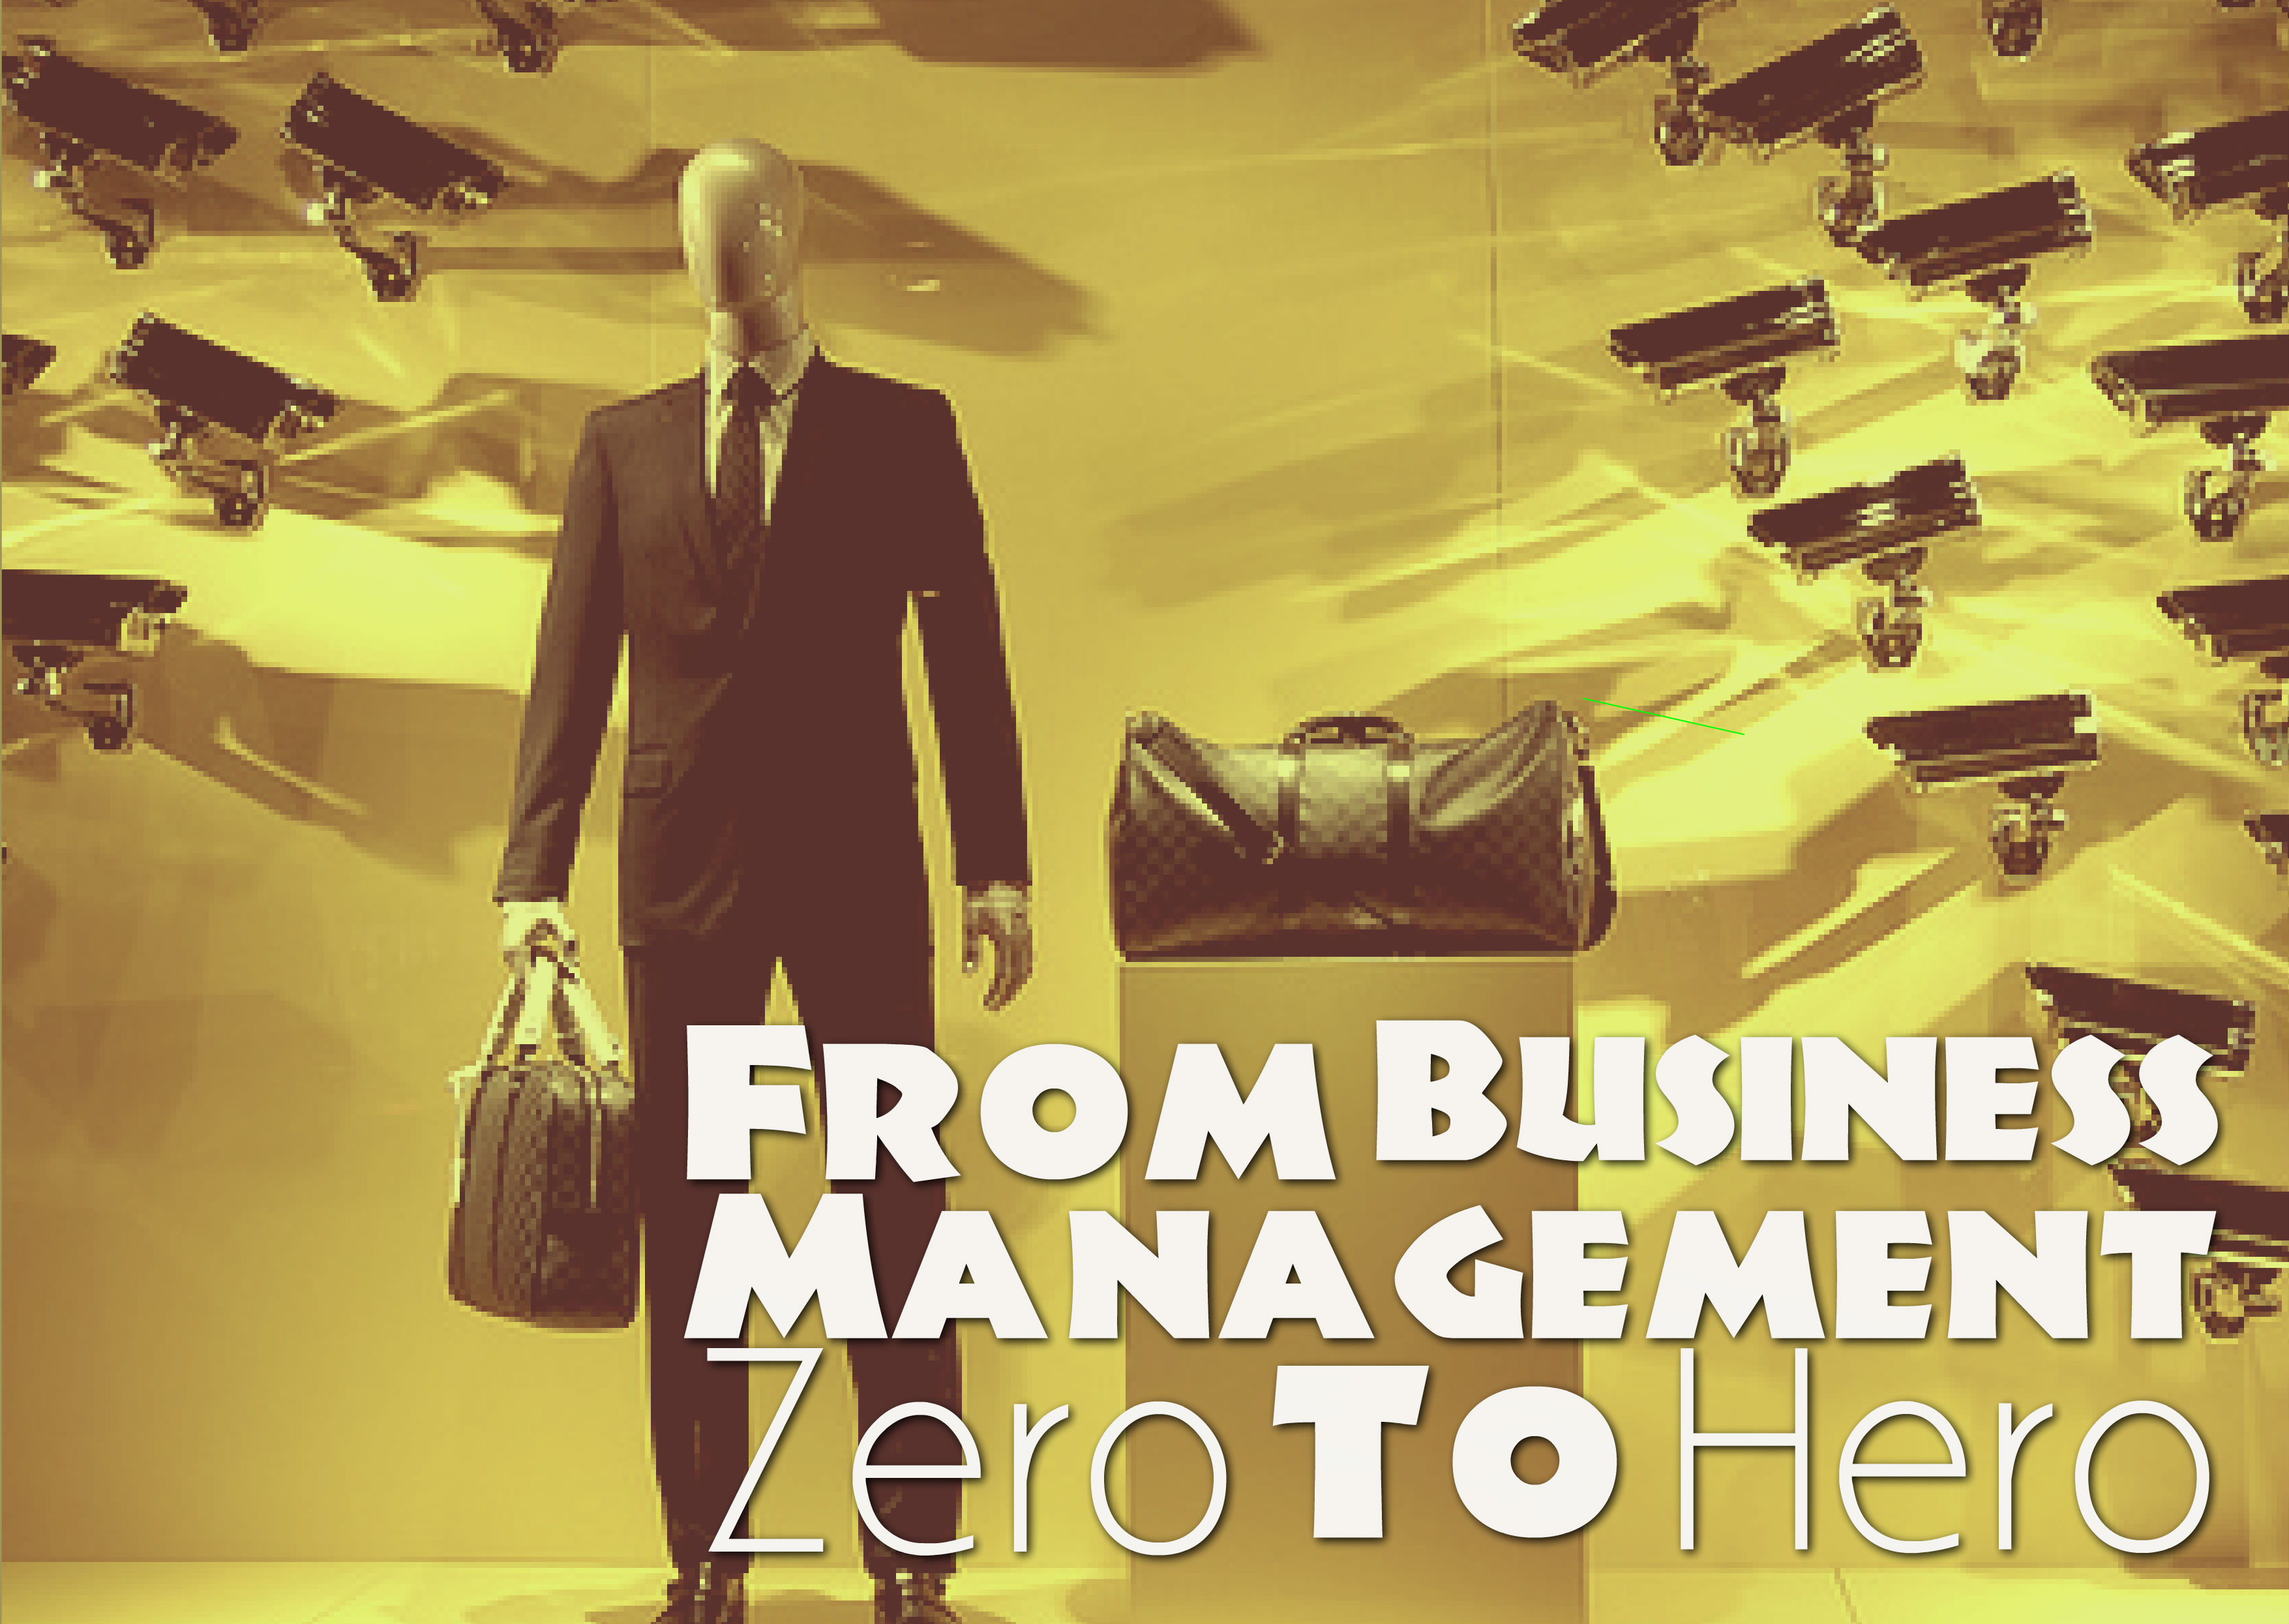 Management advice to take you from business zero to hero